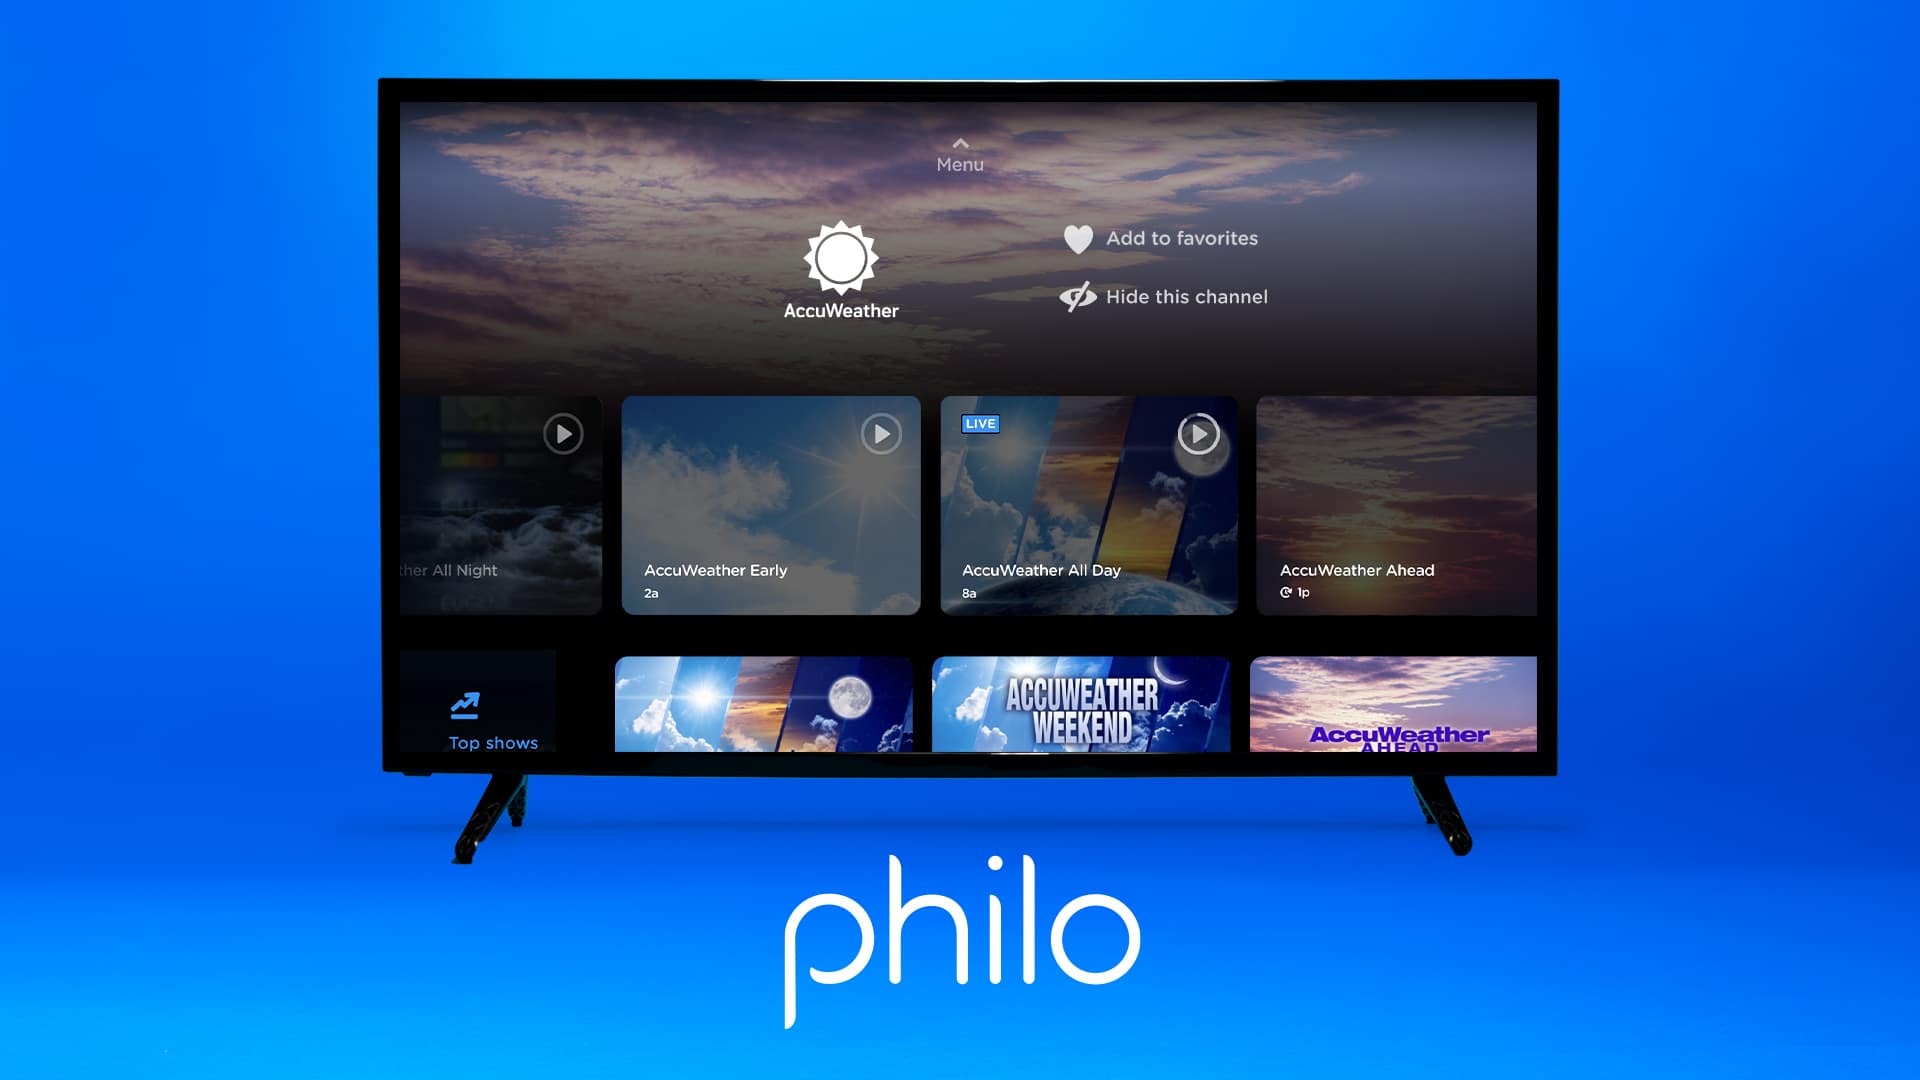 Philo Adds AccuWeather to Lineup